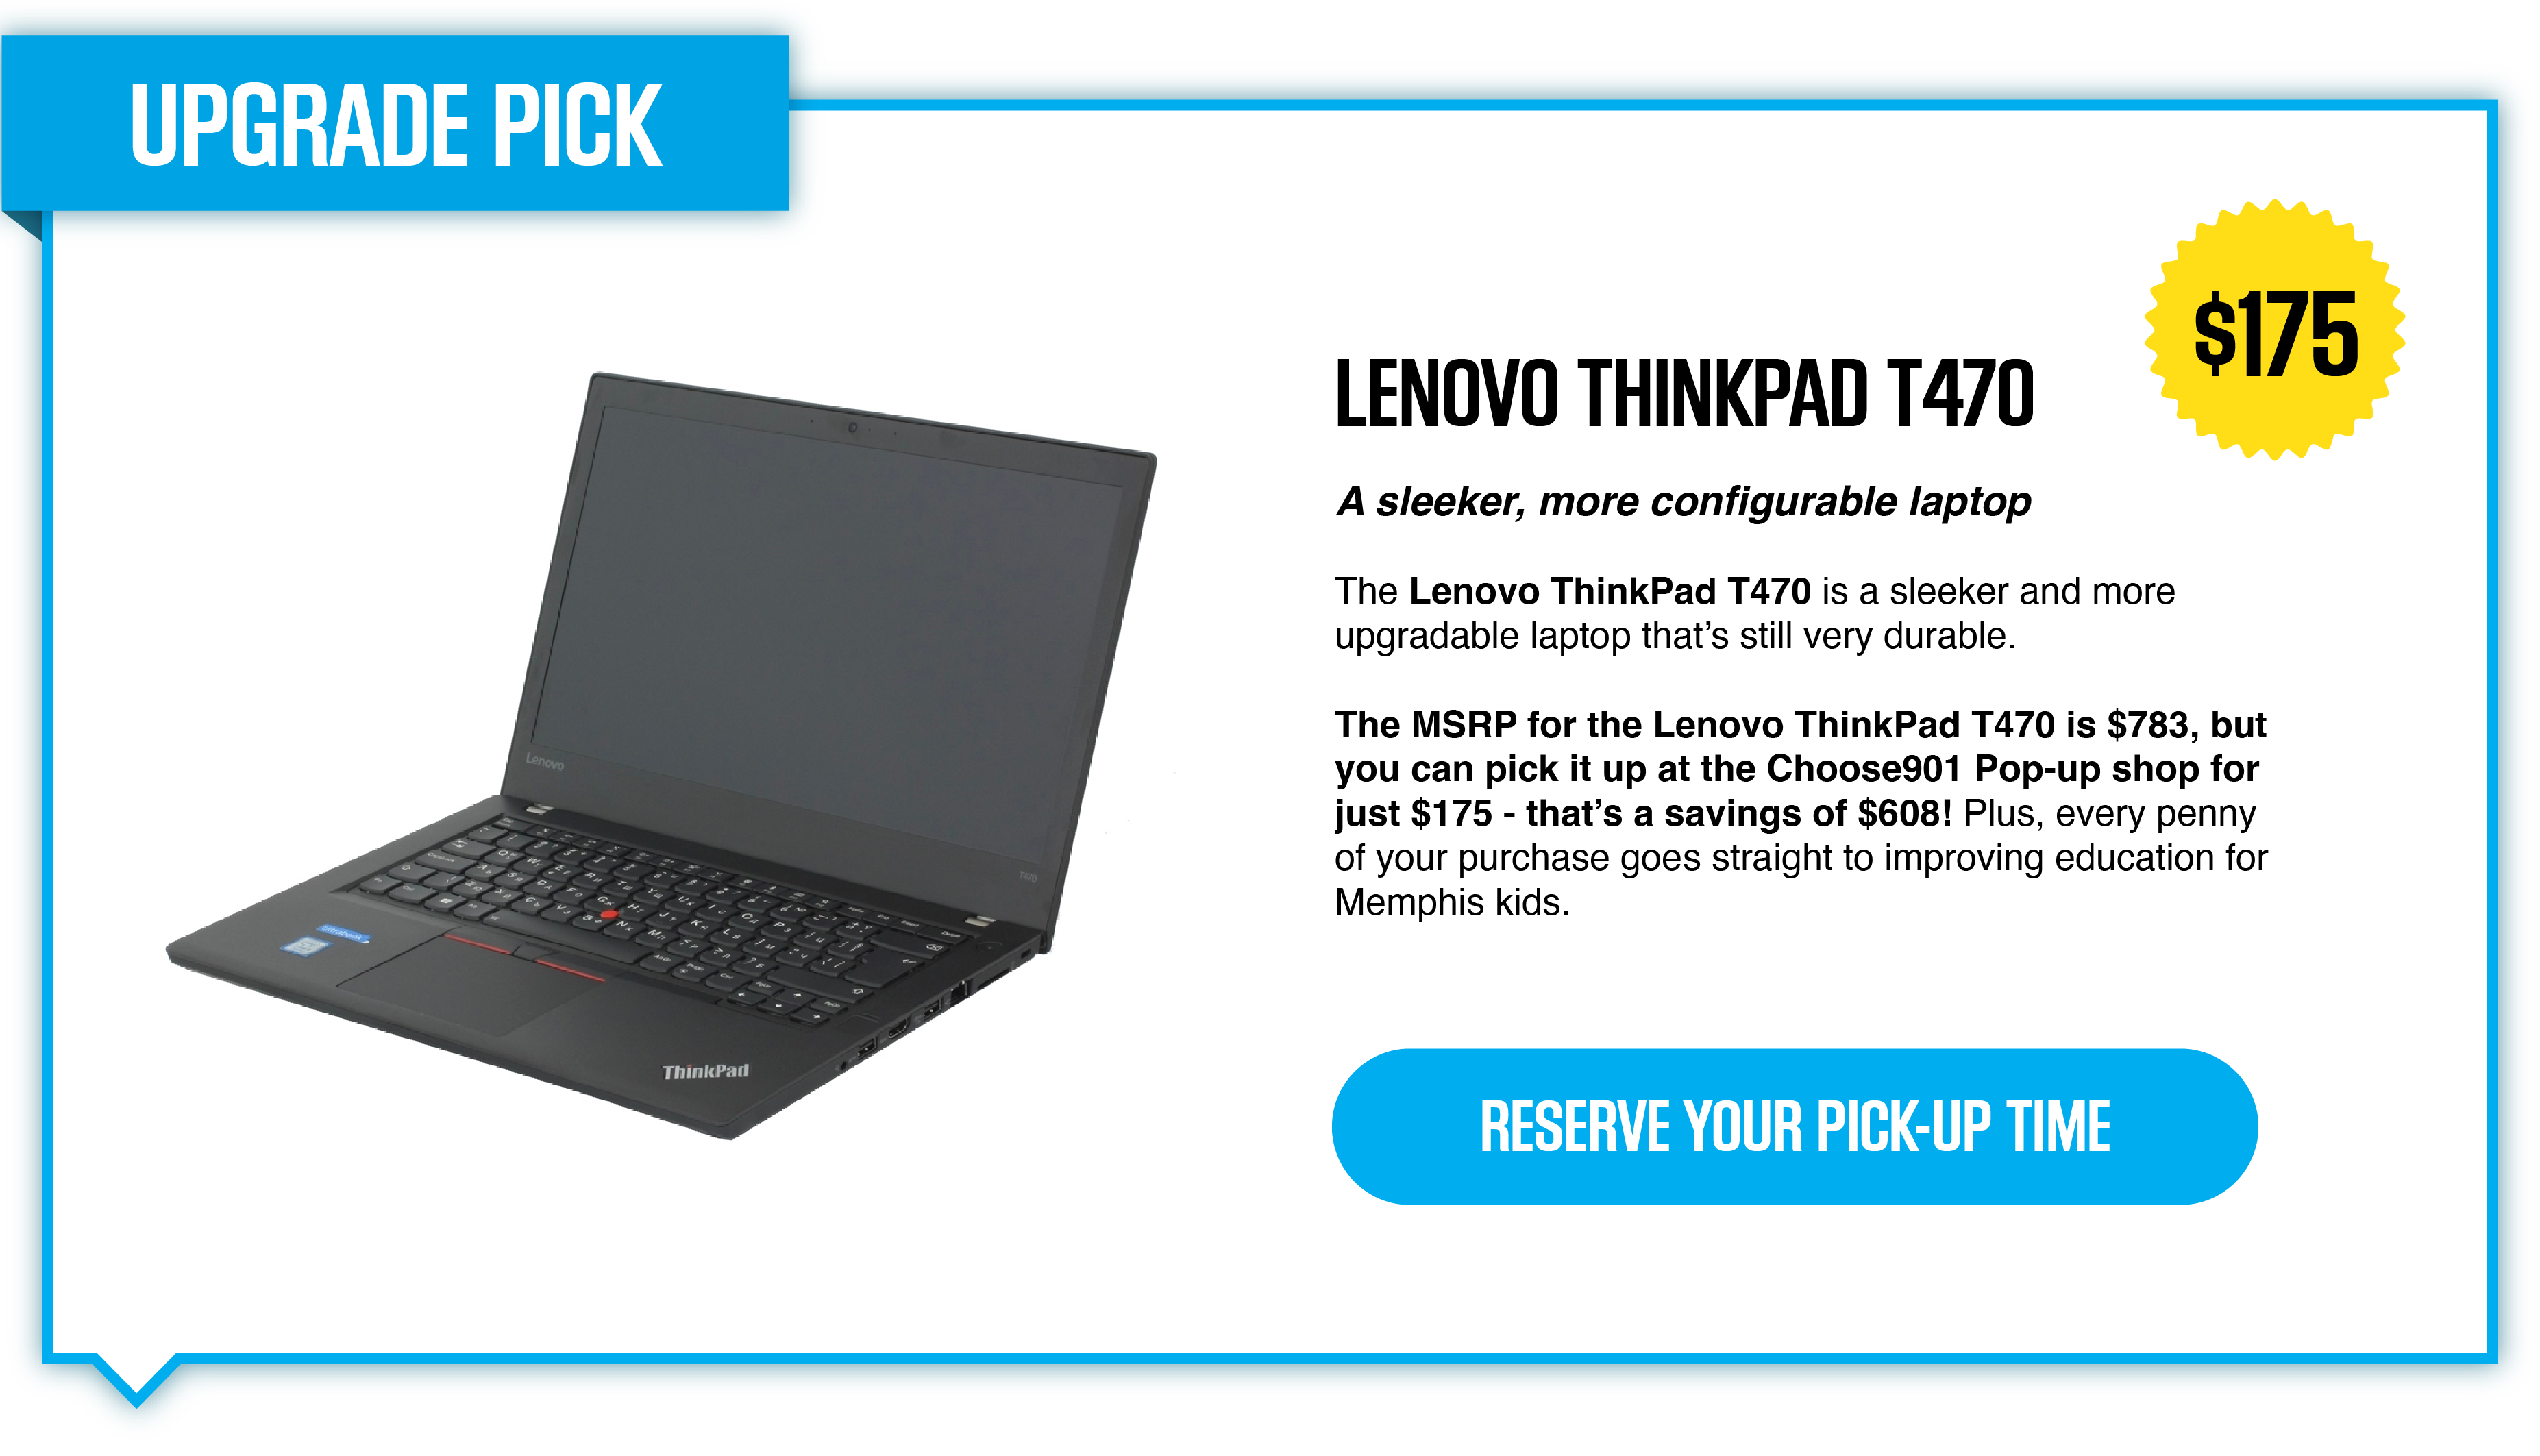 Lenovo thinkpad t530 upgrade pick for Computers for a Cause.